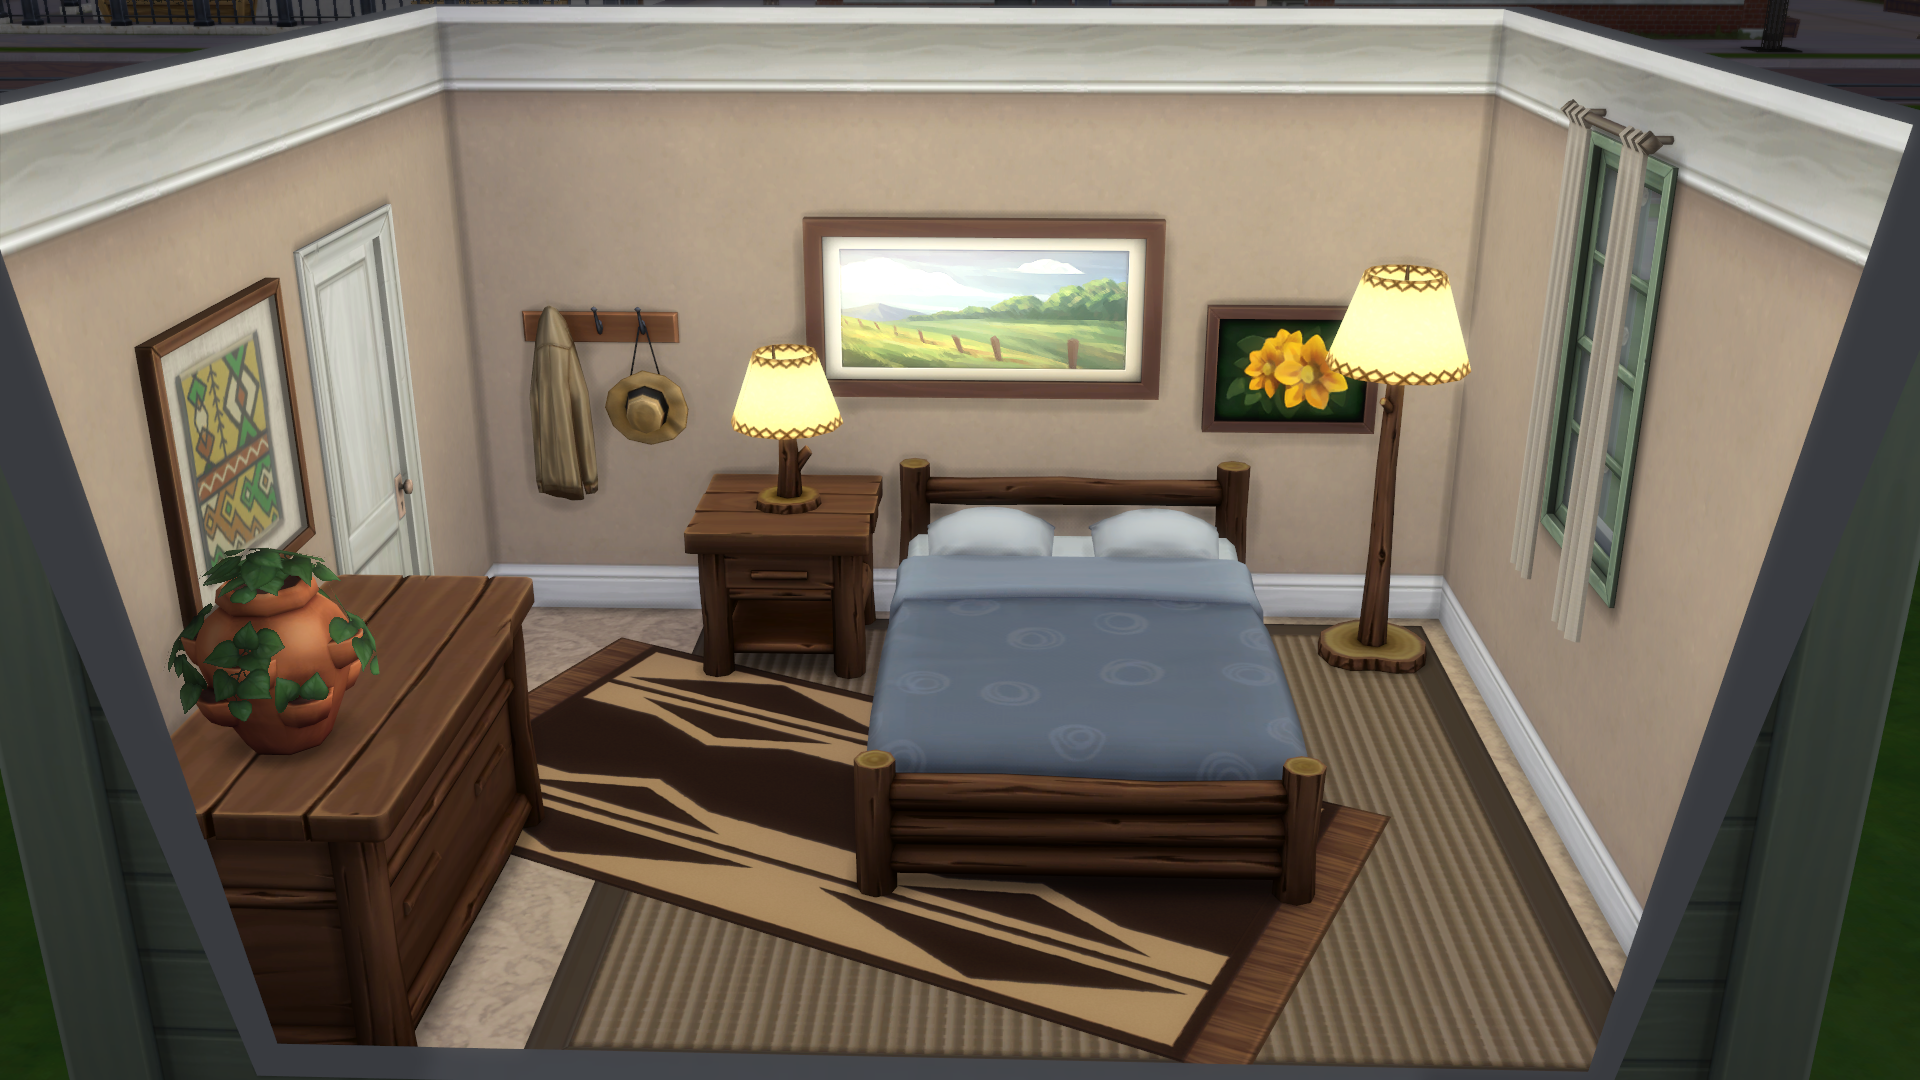 sims 4 bedroom cc download collaboration